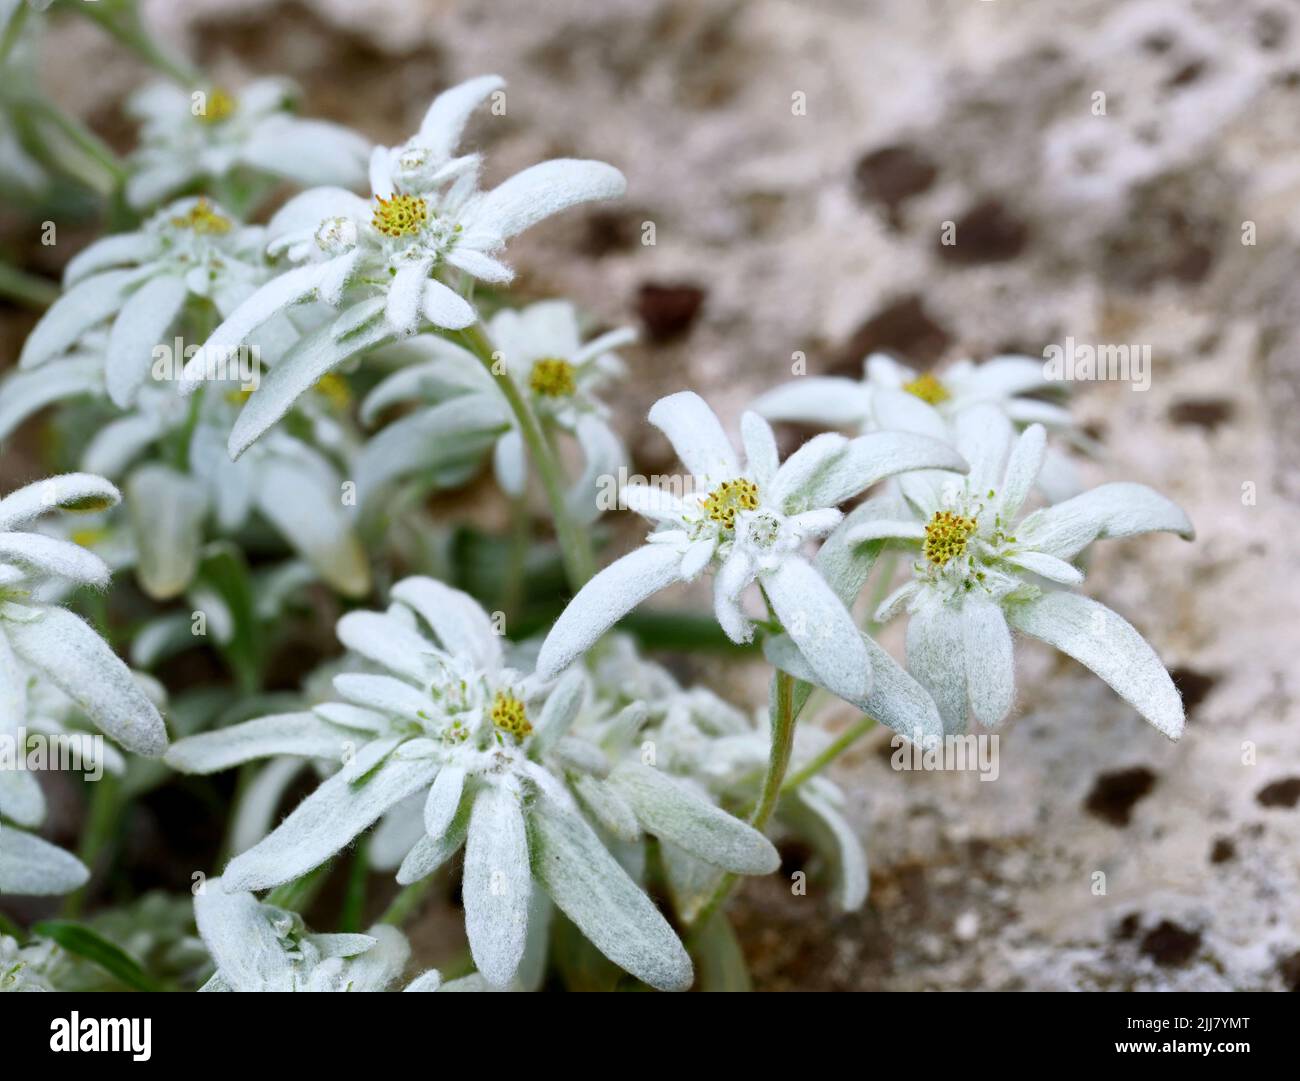 Edelweiss or Leontopodium alpinum blooming in the alps between rocks, closeup of a rare alpine flower Stock Photo